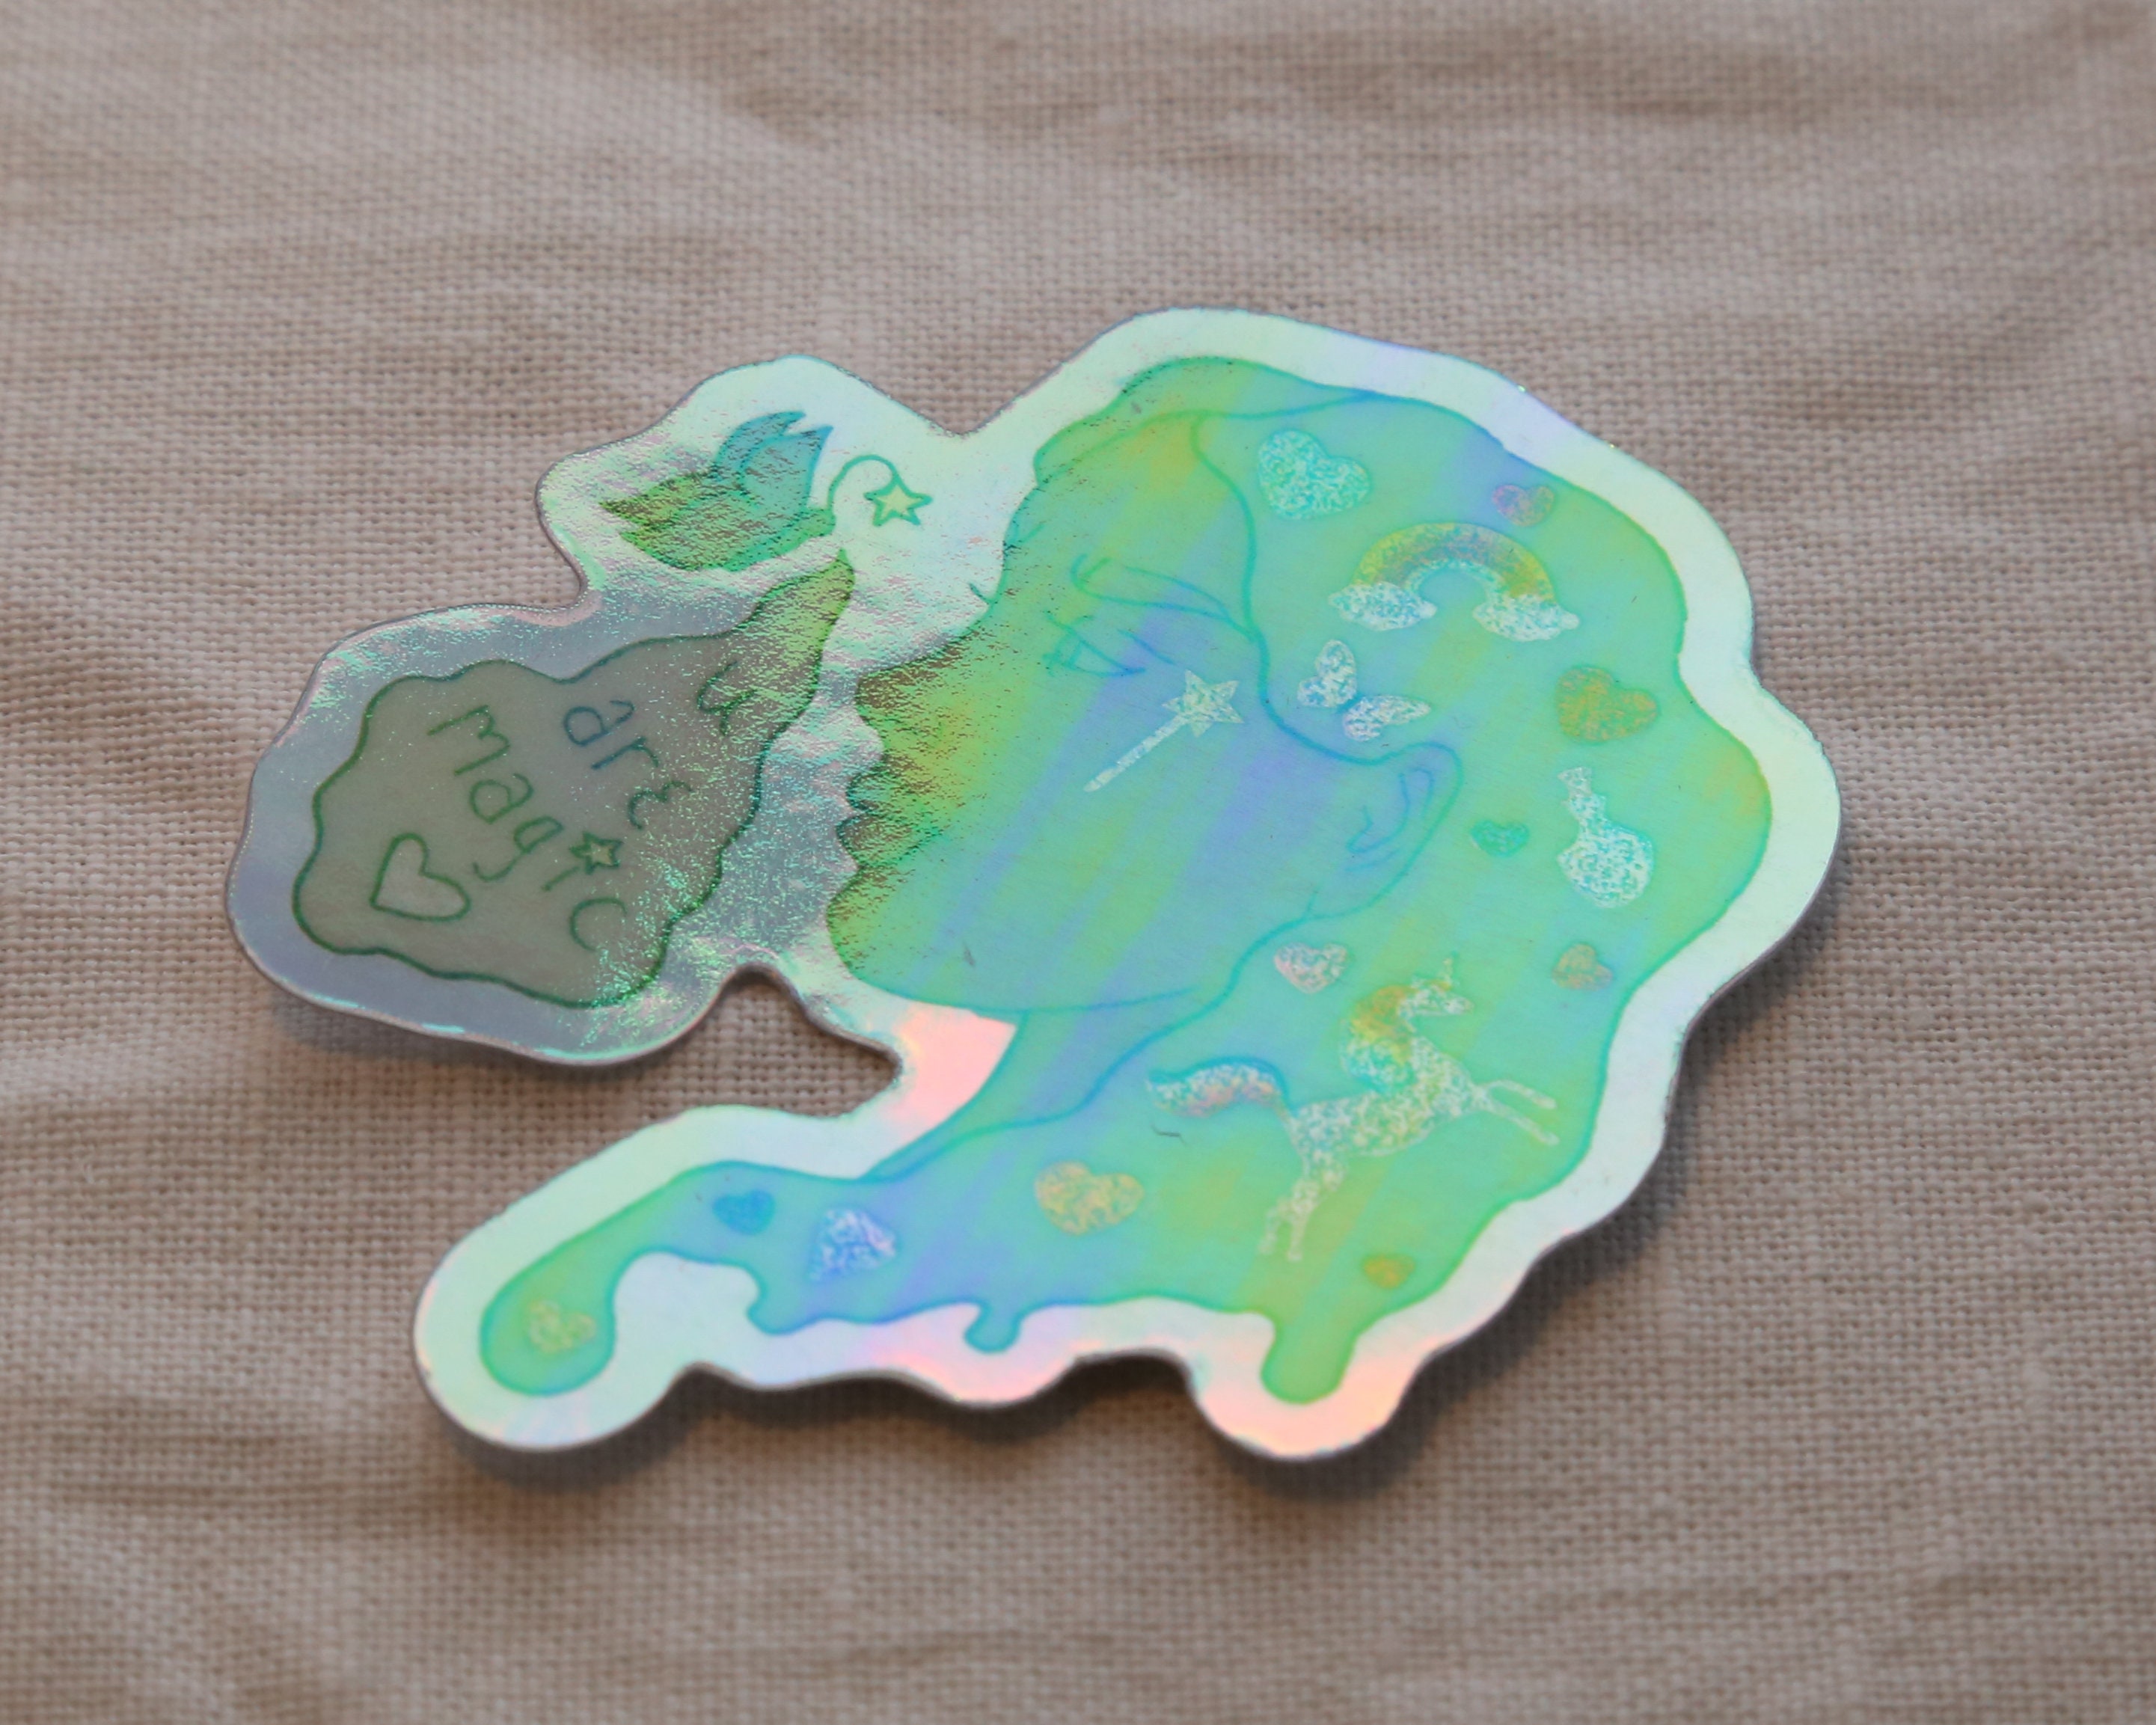 Stay in Your Magic” 4” Holographic Sticker – Blue and Blue